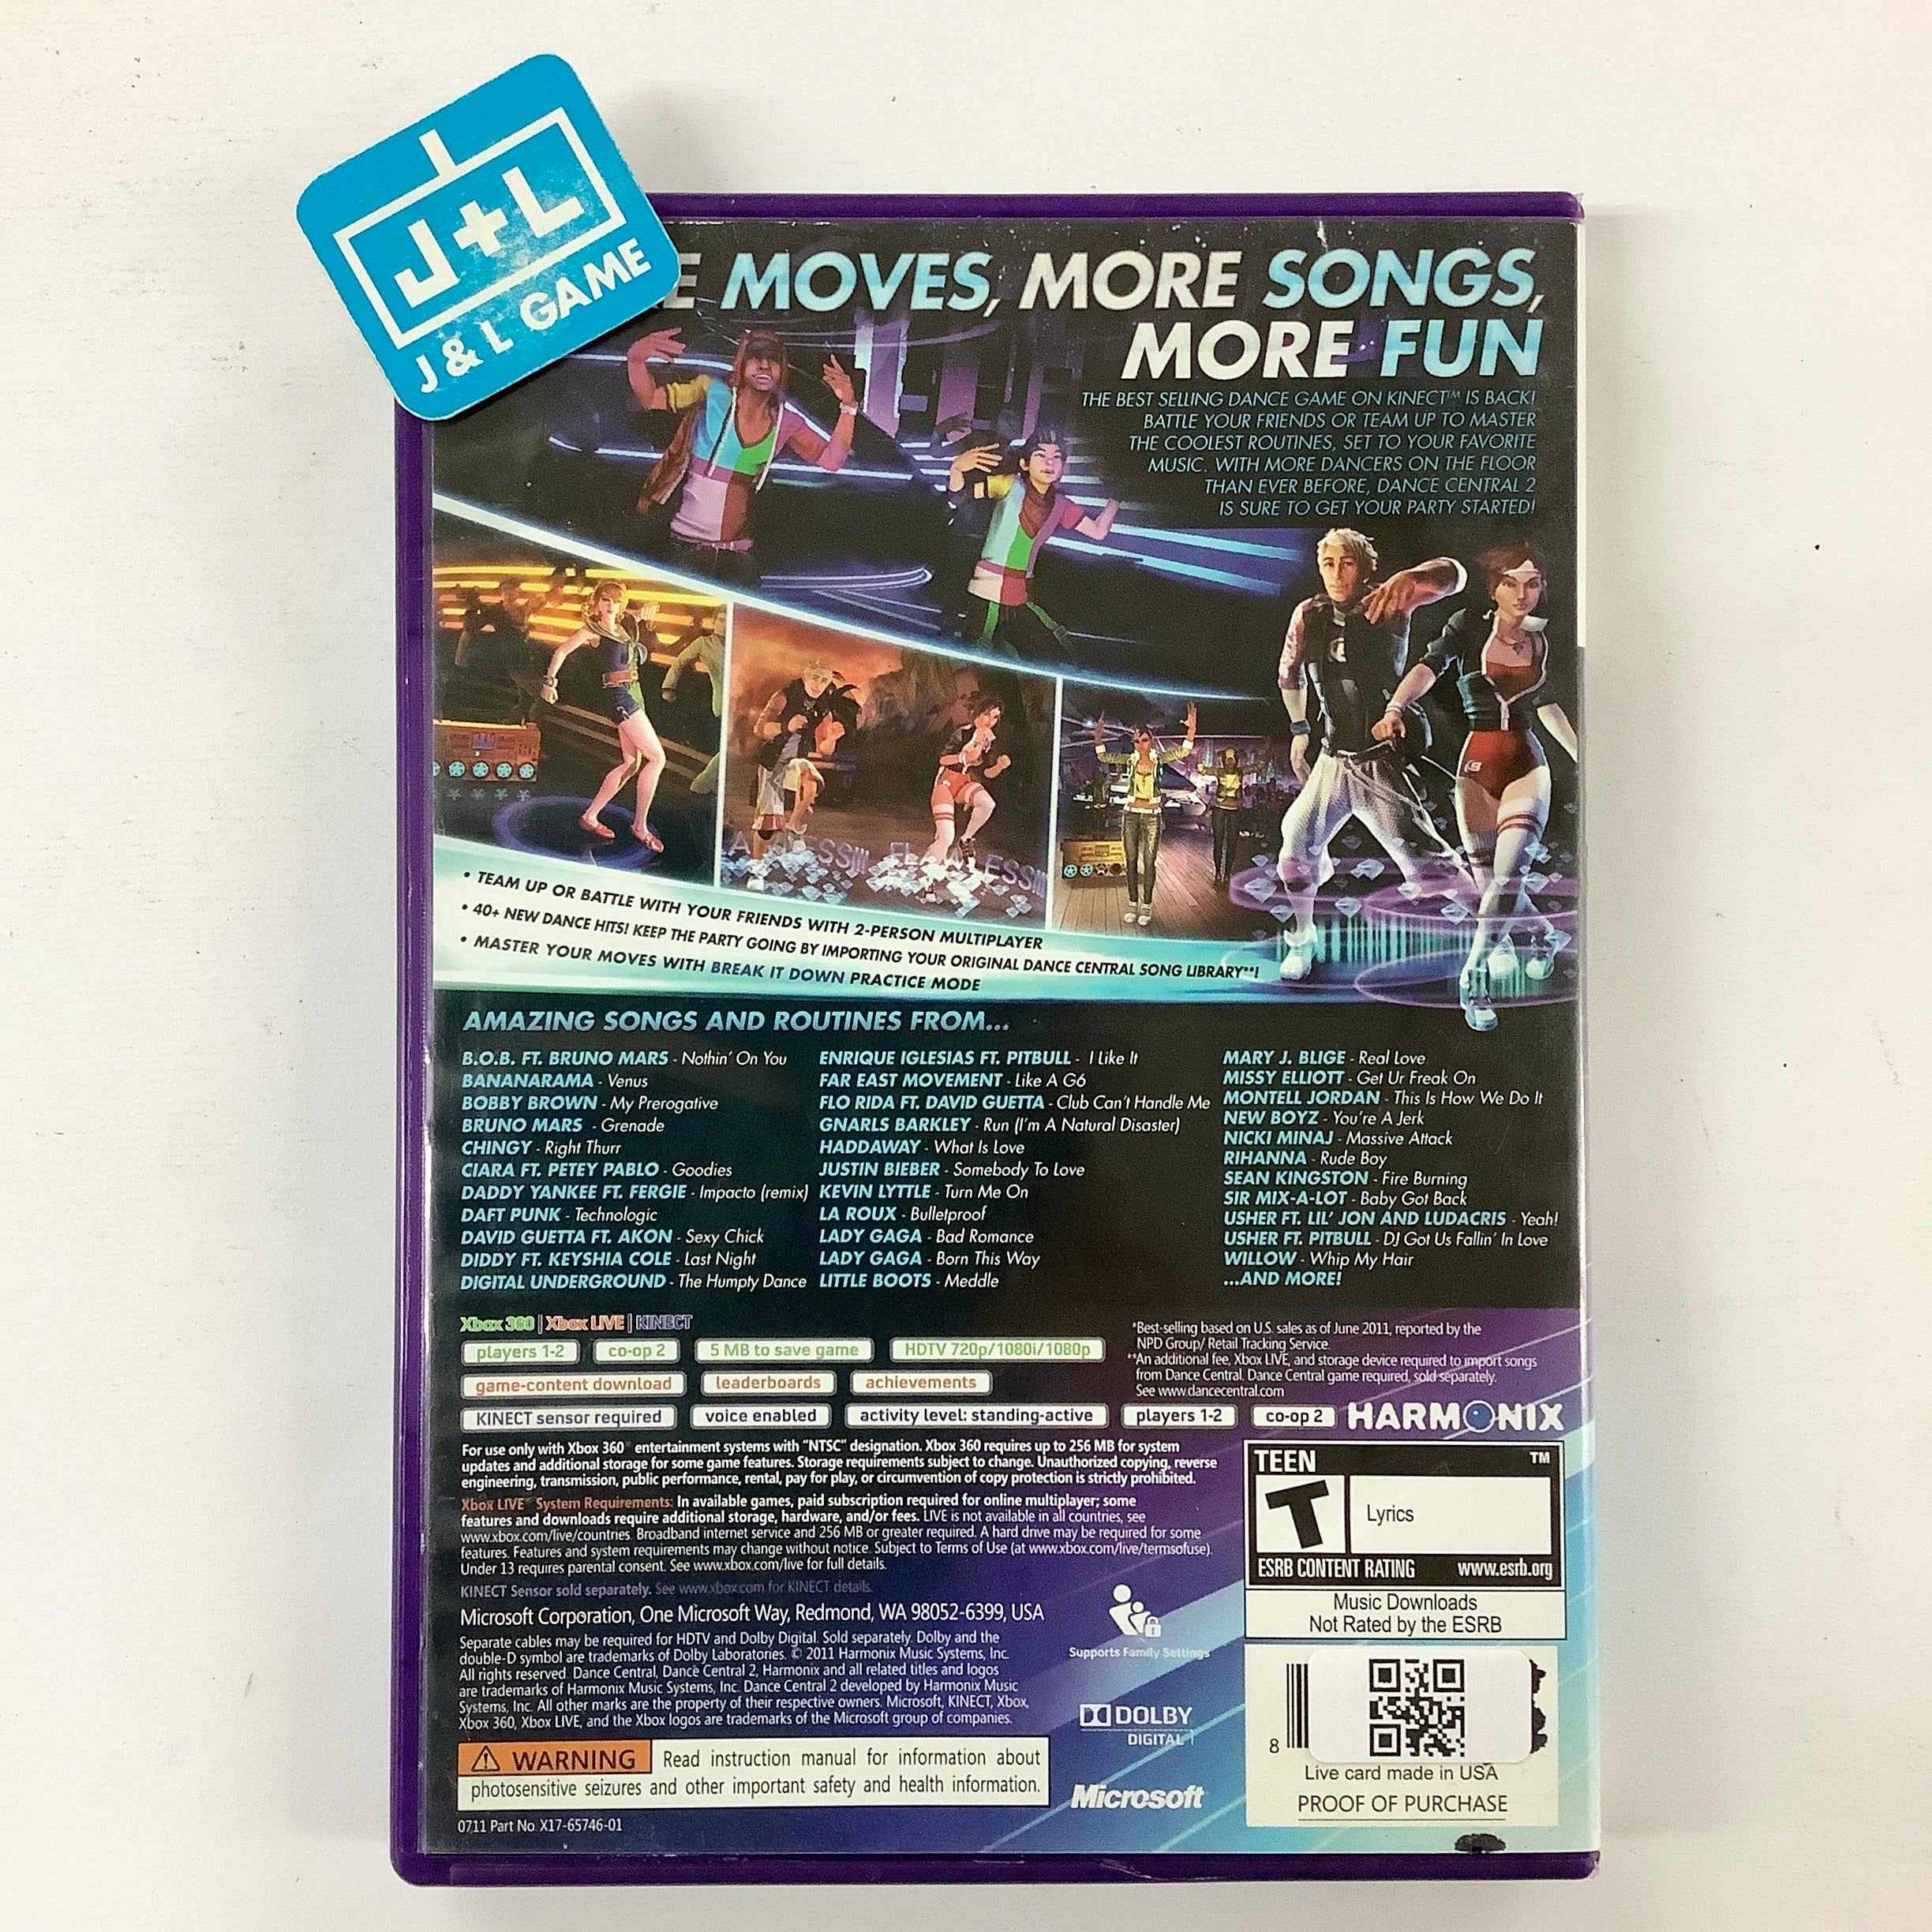 Dance Central 2 (Kinect Required) - Xbox 360 [Pre-Owned] Video Games Microsoft Game Studios   